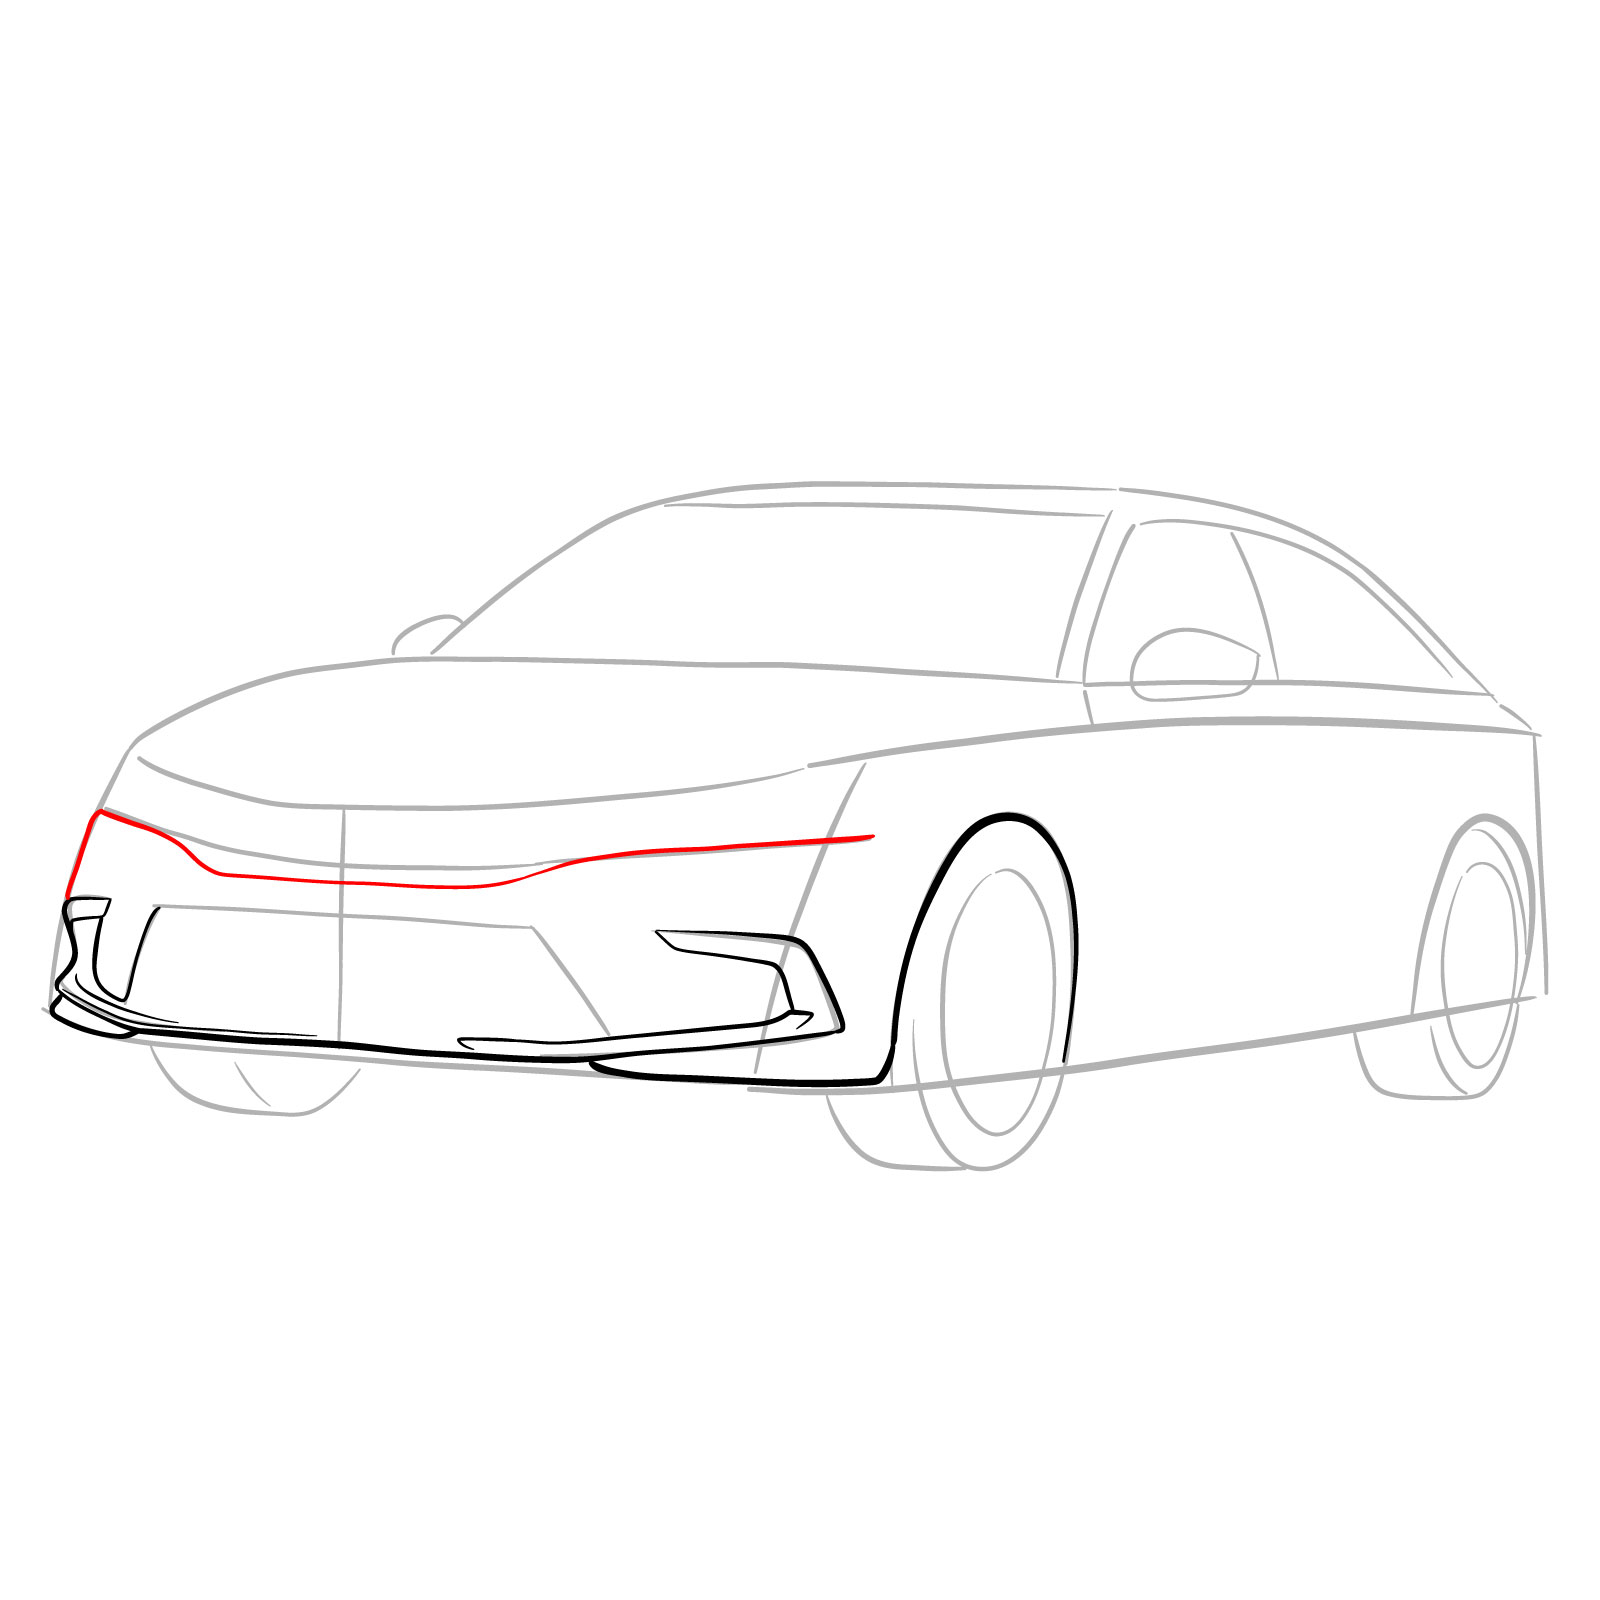 How to draw a 2022 Honda Civic - step 08